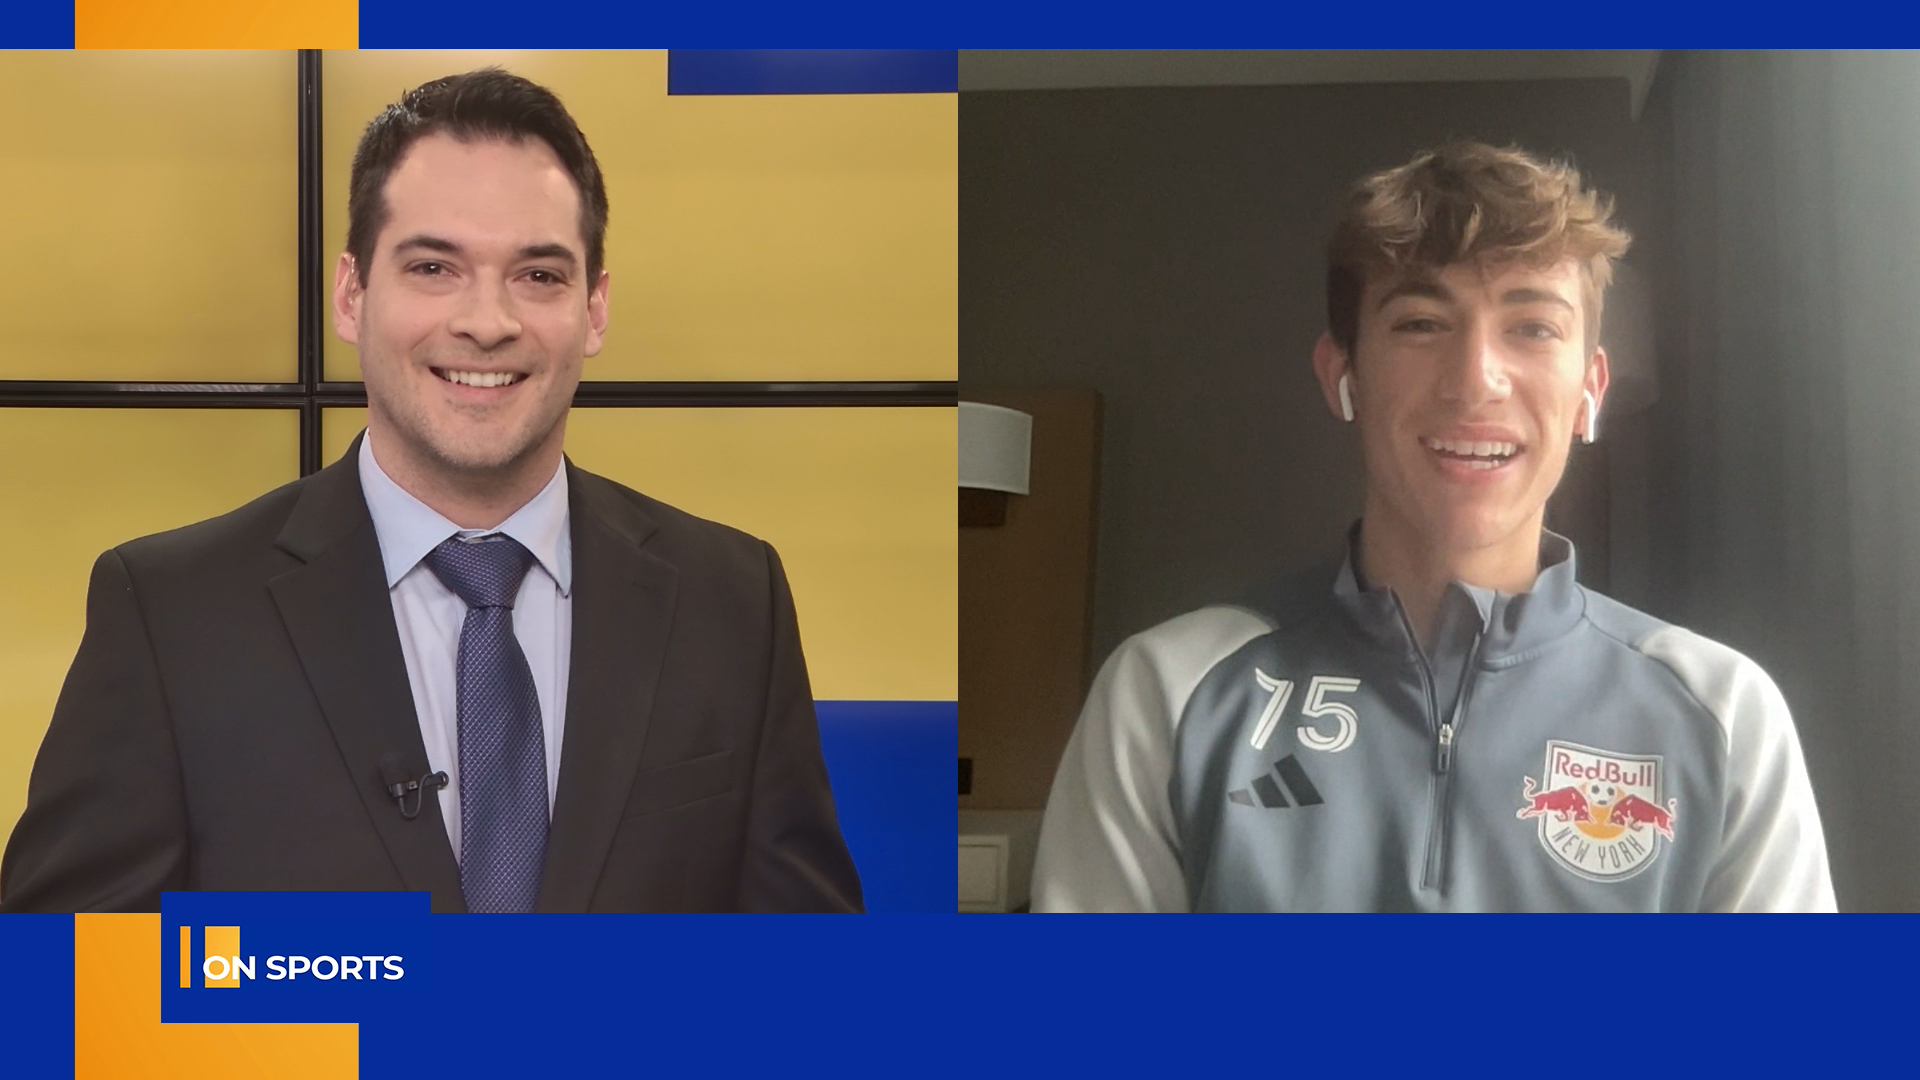 On Sports – Interview with Daniel Edelman of the NY Red Bulls